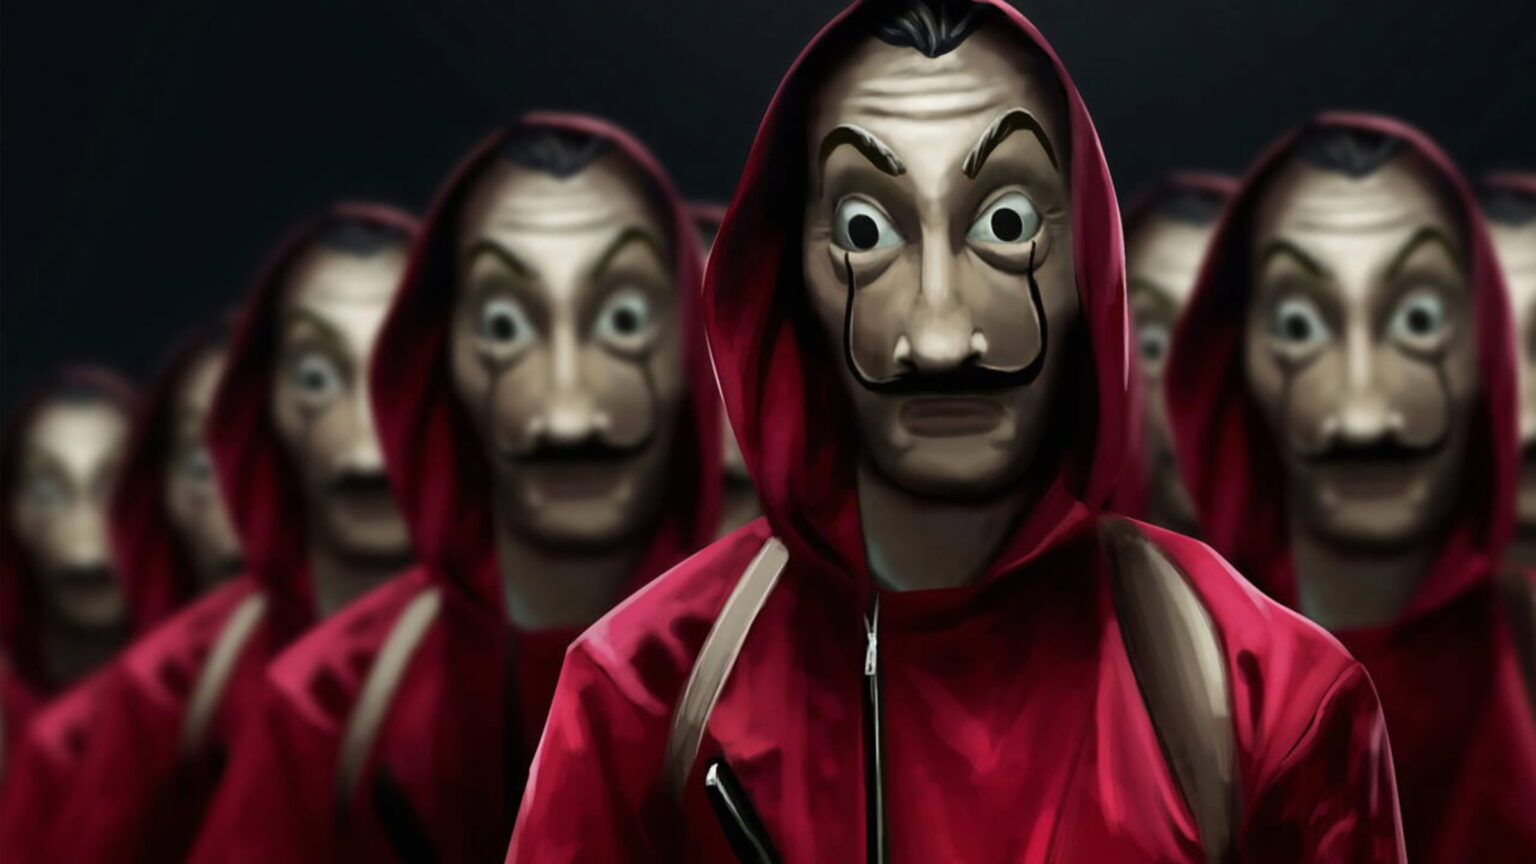 Who will survive part 5 of 'Money Heist'? Fans have plenty of theories on which main character will be killed off next.